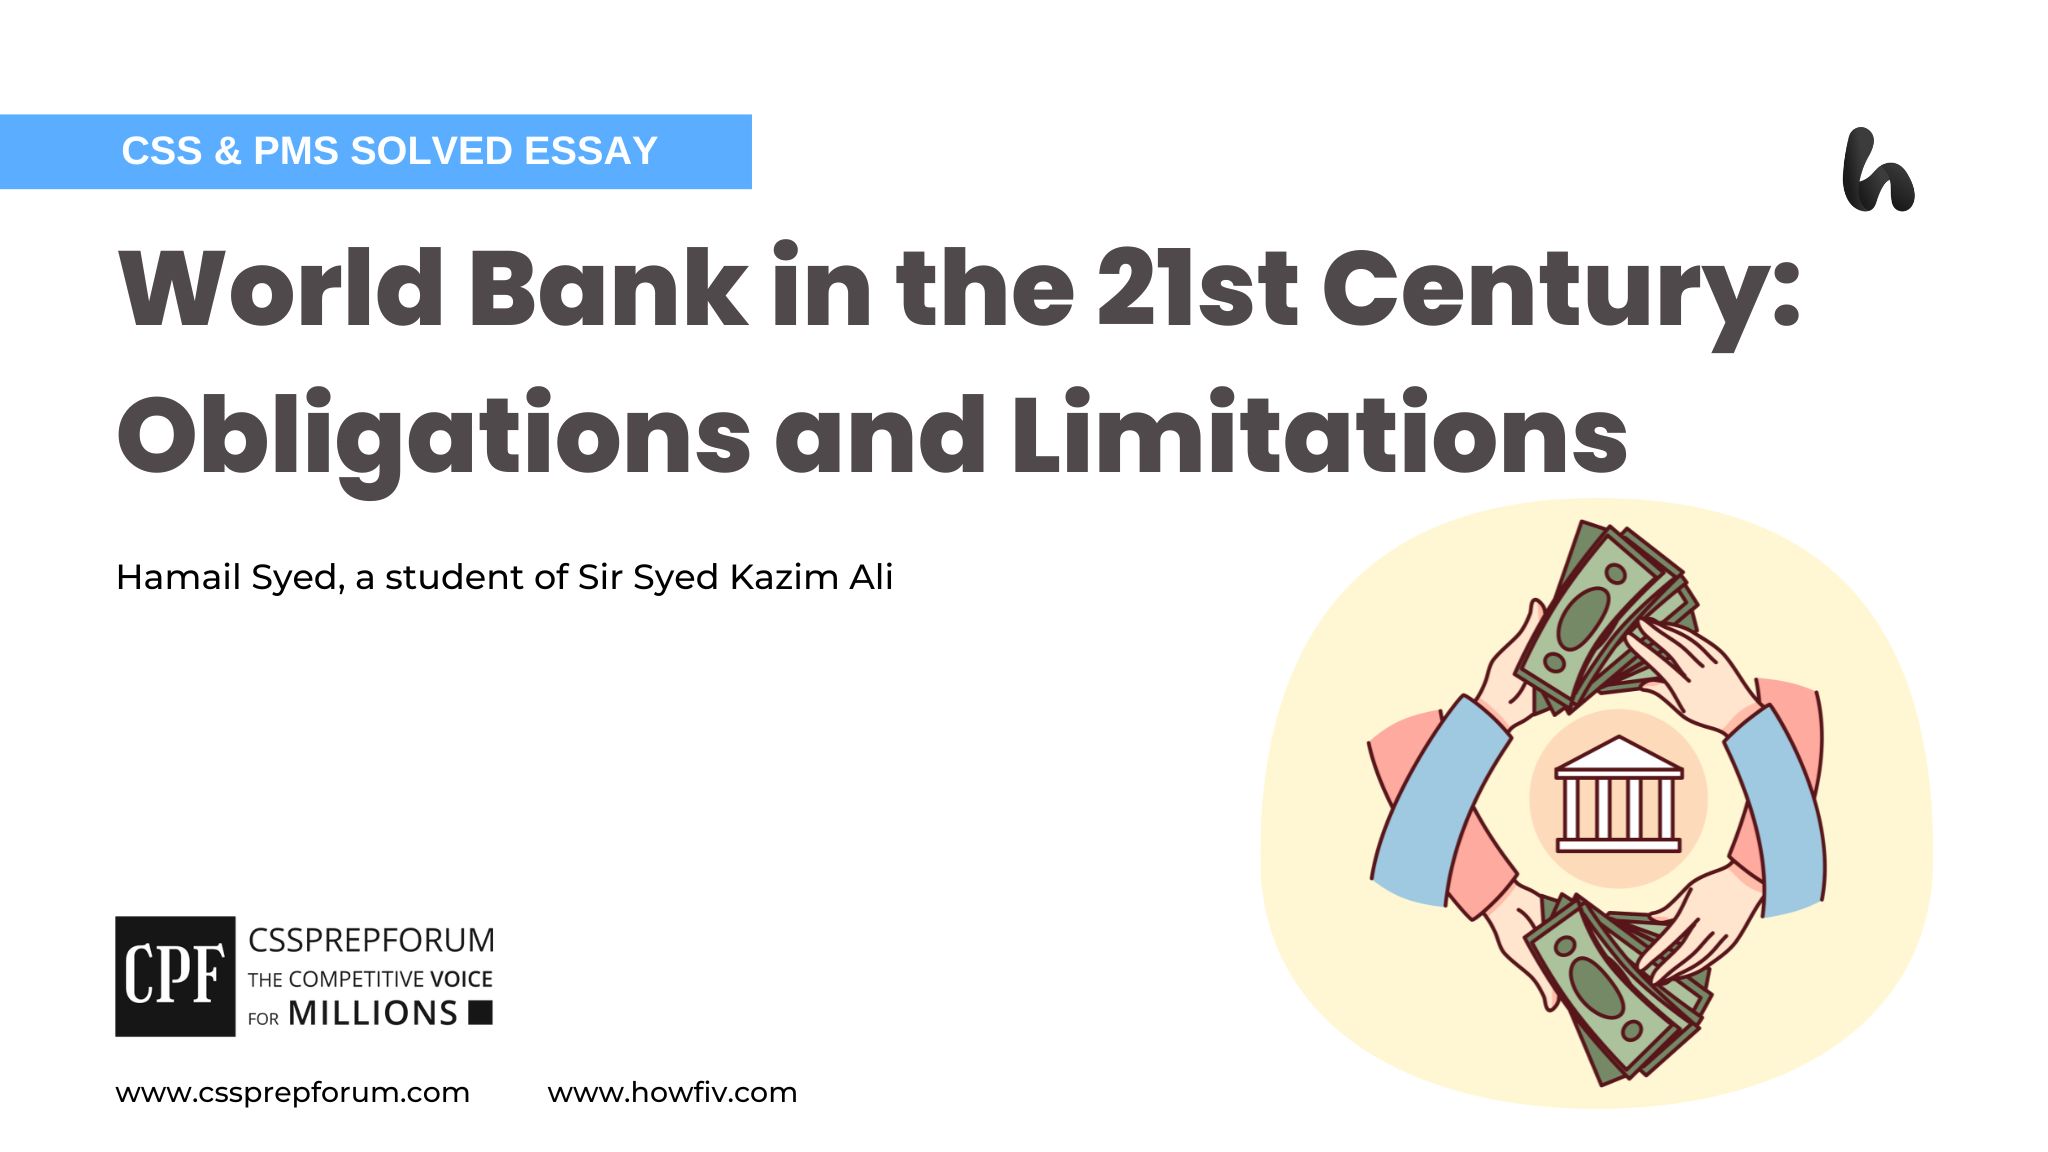 World Bank in the 21st Century: Obligations and Limitations by Hamail Syed